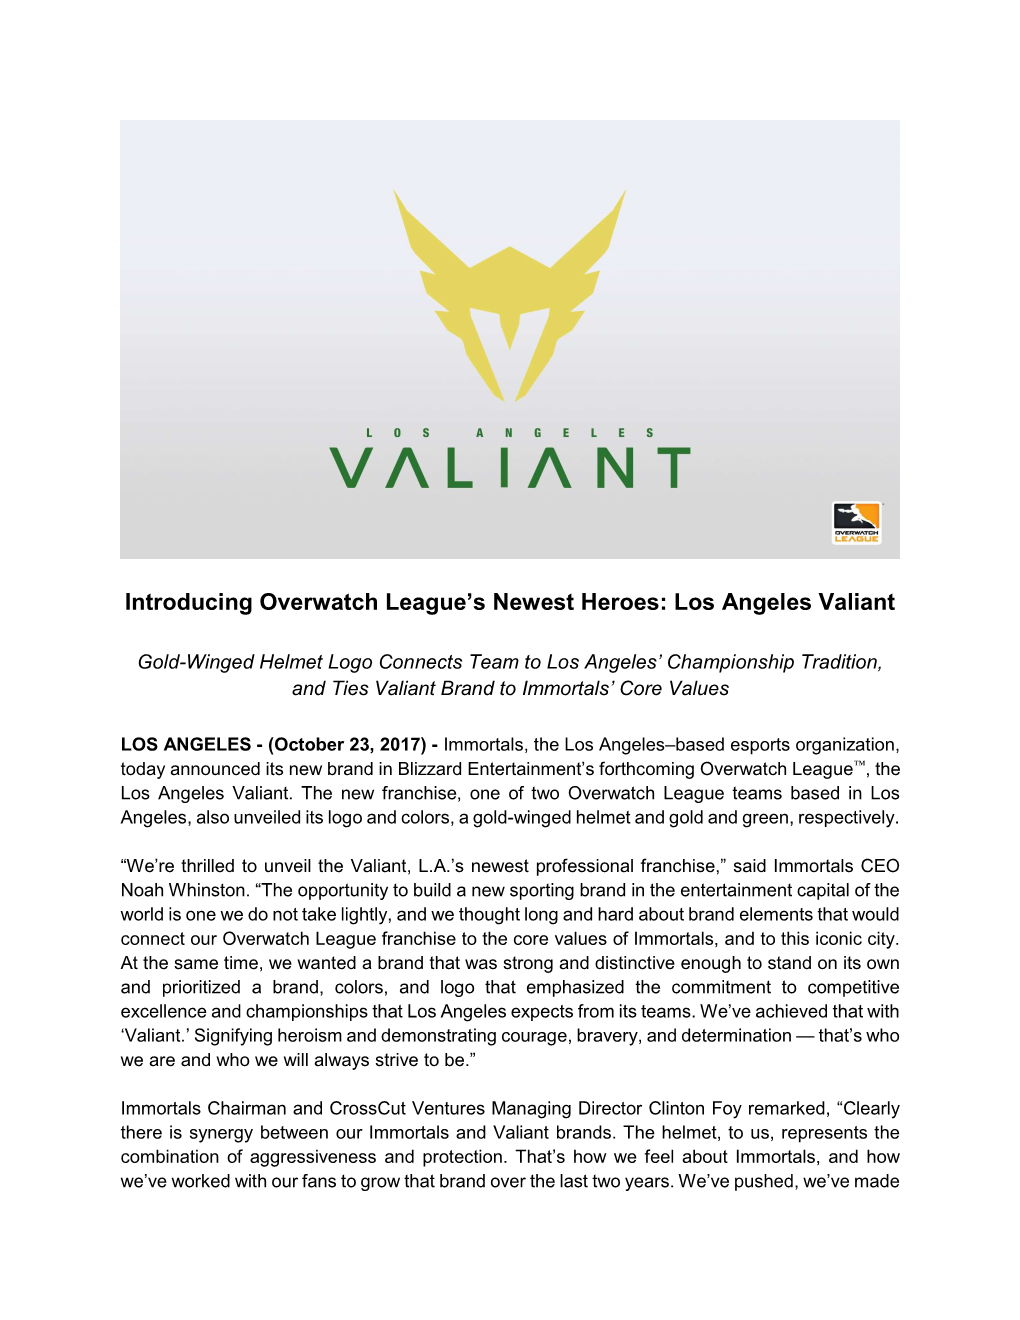 Introducing Overwatch League's Newest Heroes: Los Angeles Valiant